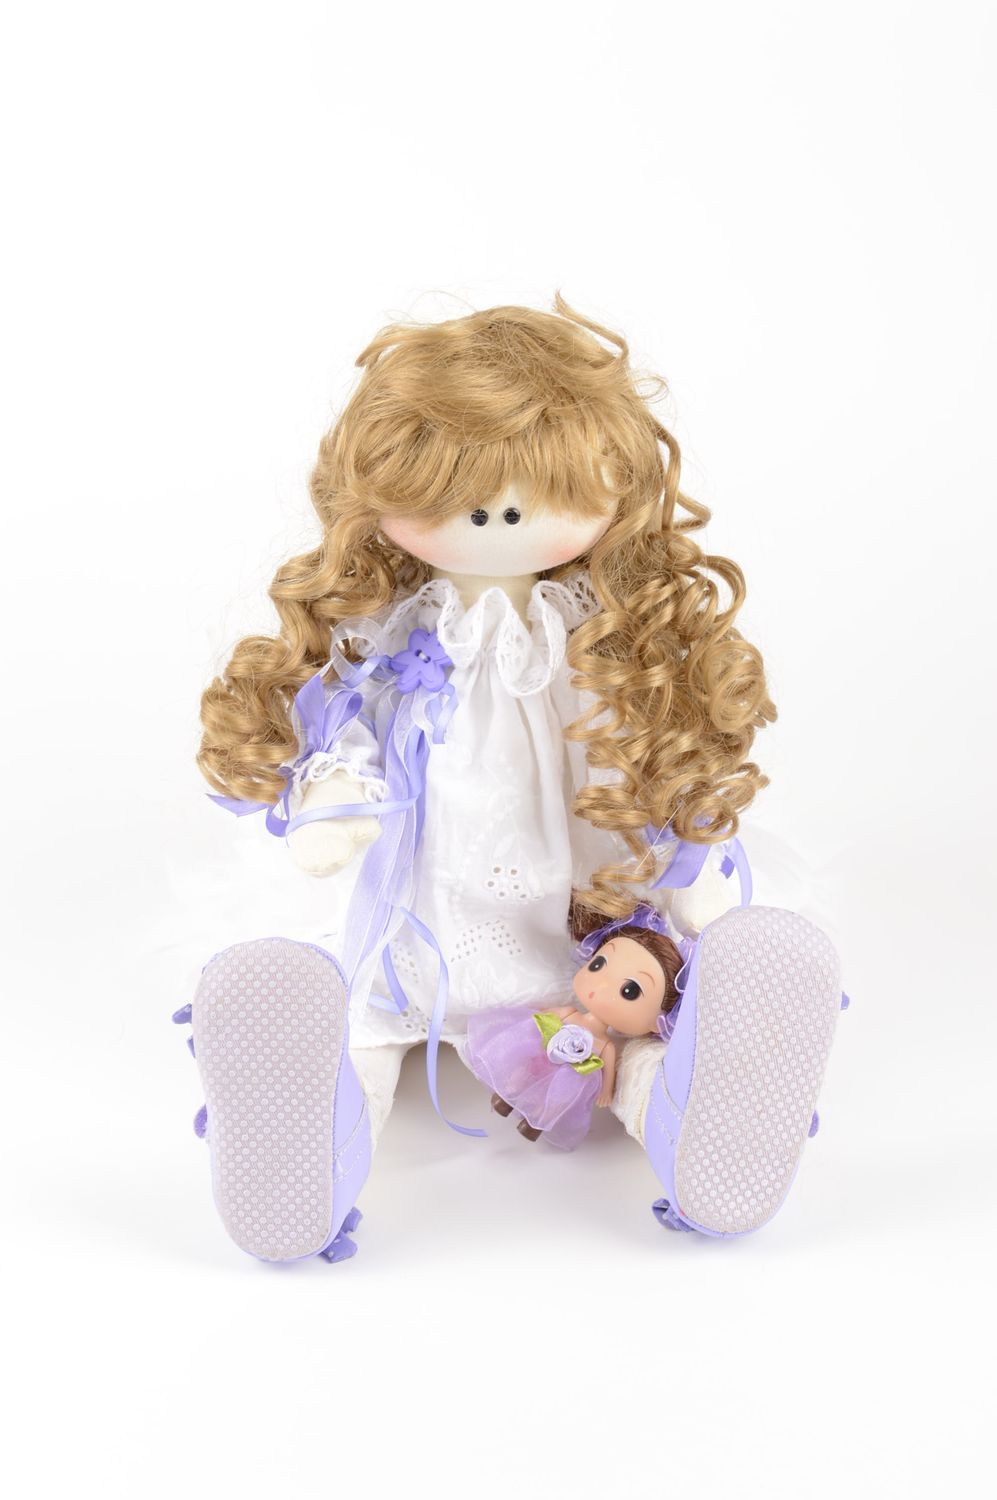 Handmade designer natural doll stylish textile doll toys made of flax photo 5